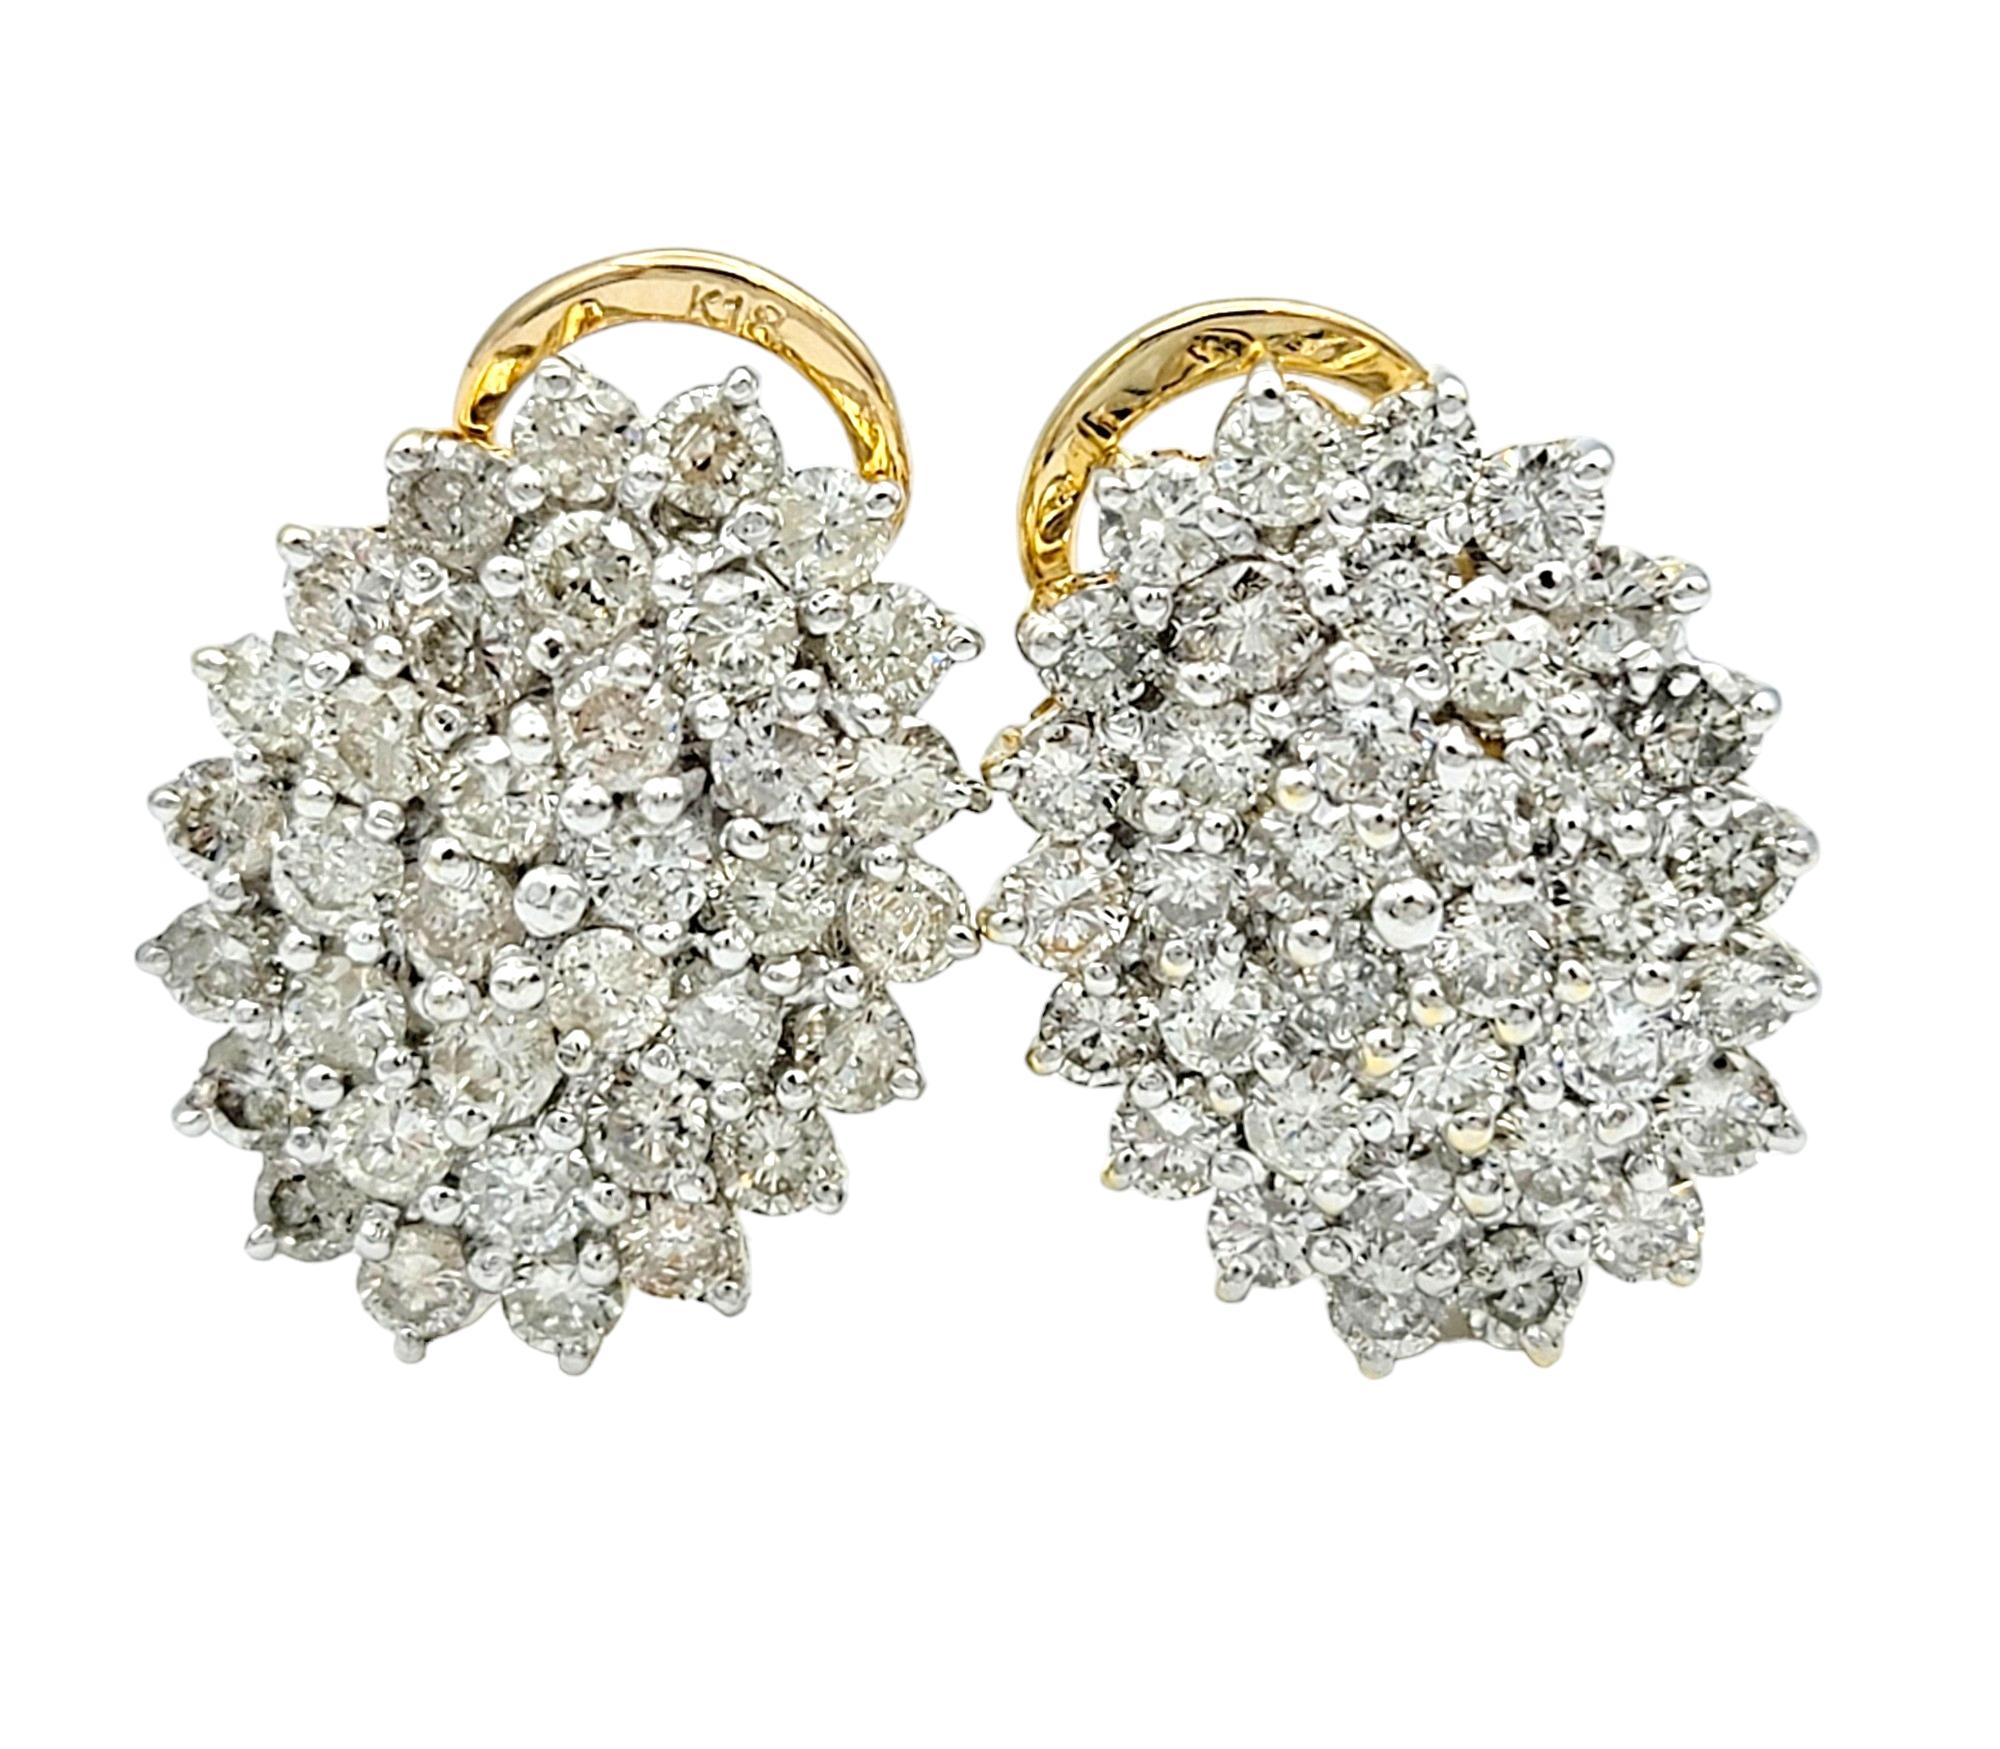 This gorgeous pair of earrings, set in lustrous 18 karat yellow gold, showcases a classic and elegant design. Each earring features a set of round diamonds arranged in an oval-shaped cluster, creating a harmonious and timeless composition. The round